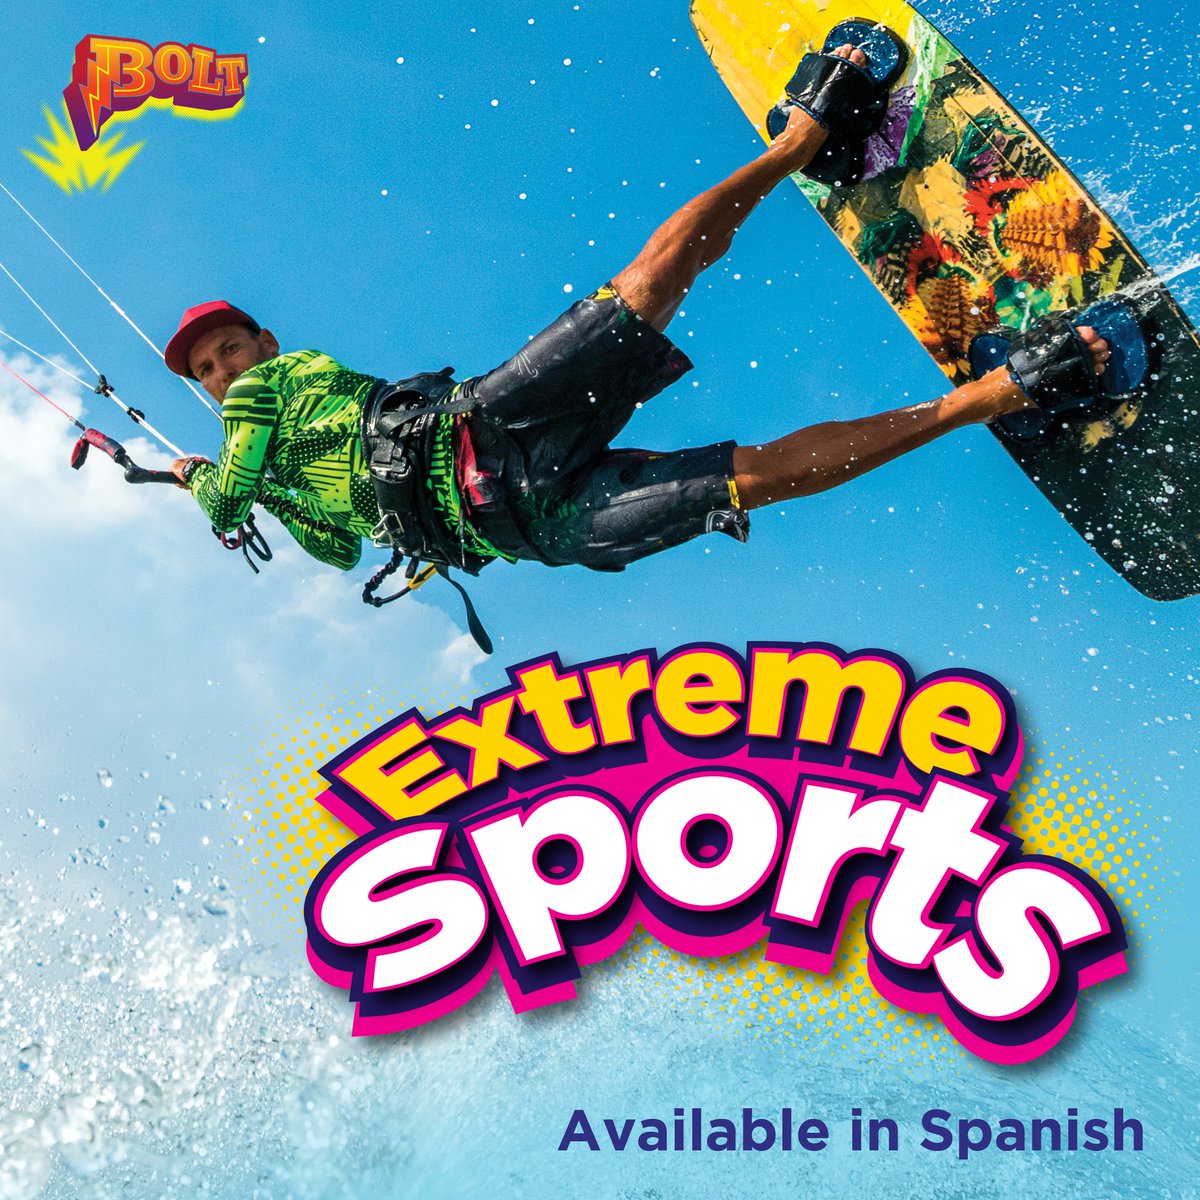 NEW SERIES! Extreme Sports has action-packed photography, leveled text, and infographics making it a perfect choice for reluctant readers.

Shop the series: blackrabbitbooks.com/collections/ex…

#newbooks #extremesports #reluctantreaders #BlackRabbitBooks